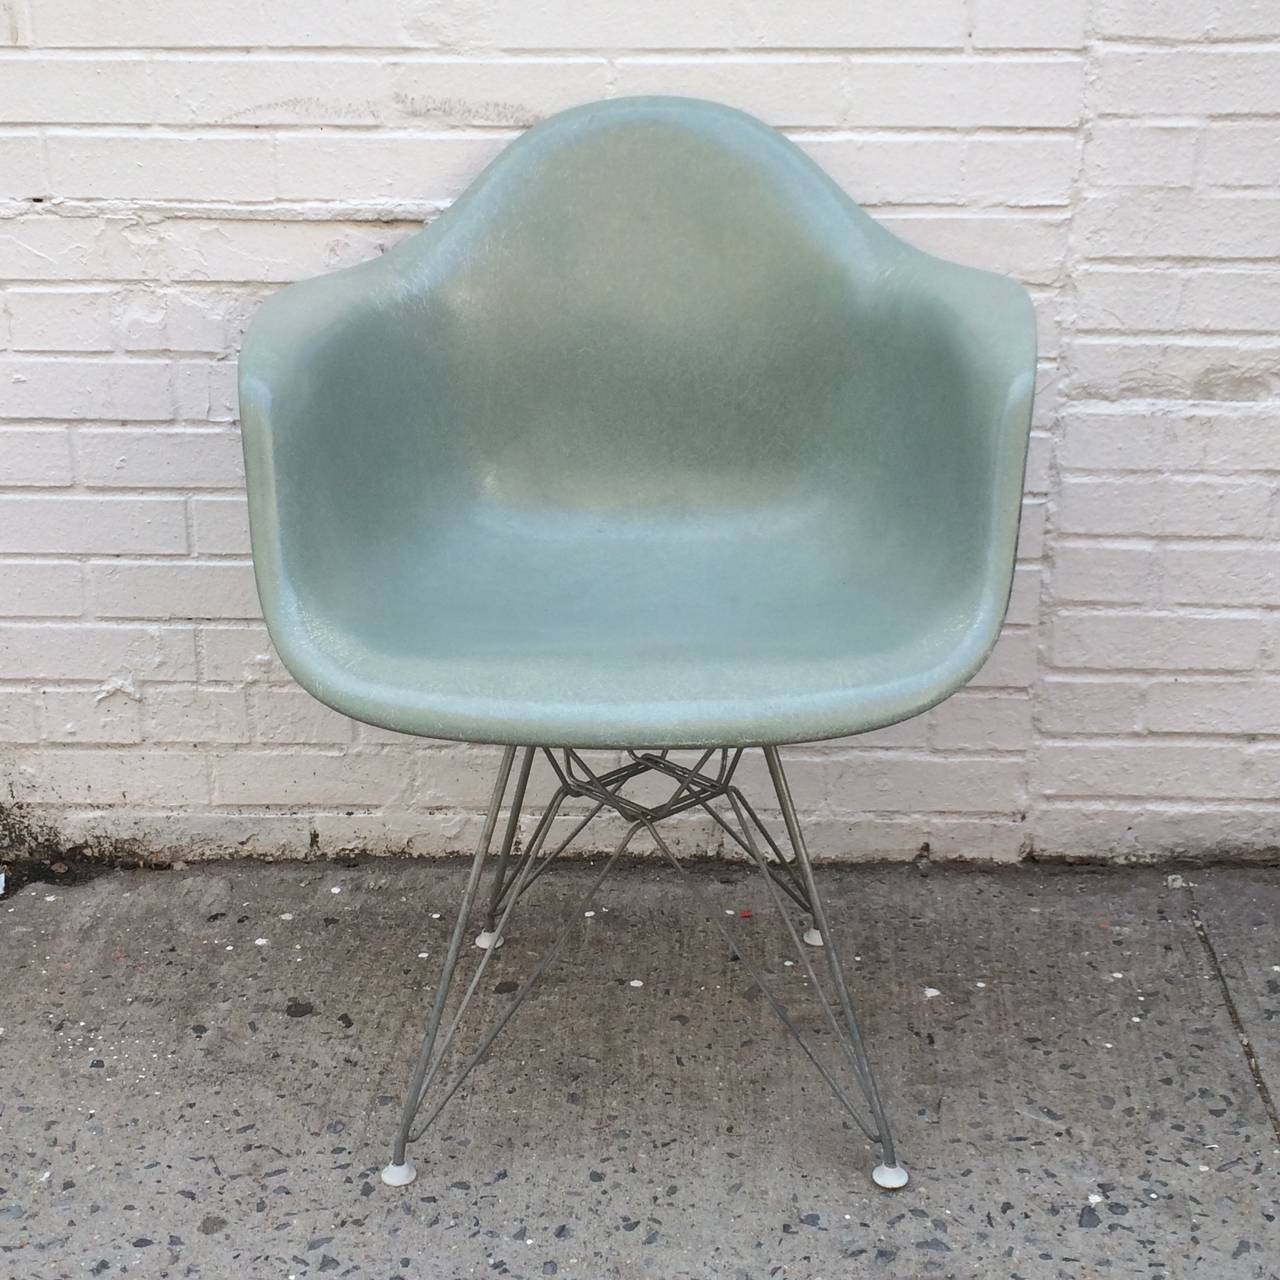 Herman Miller Eames Seafoam Green fiberglass DAR chair. Eiffel base with original glides. Original mounts and screws. Round medallion label. 1950s shell with incredibly high fiber contrast.